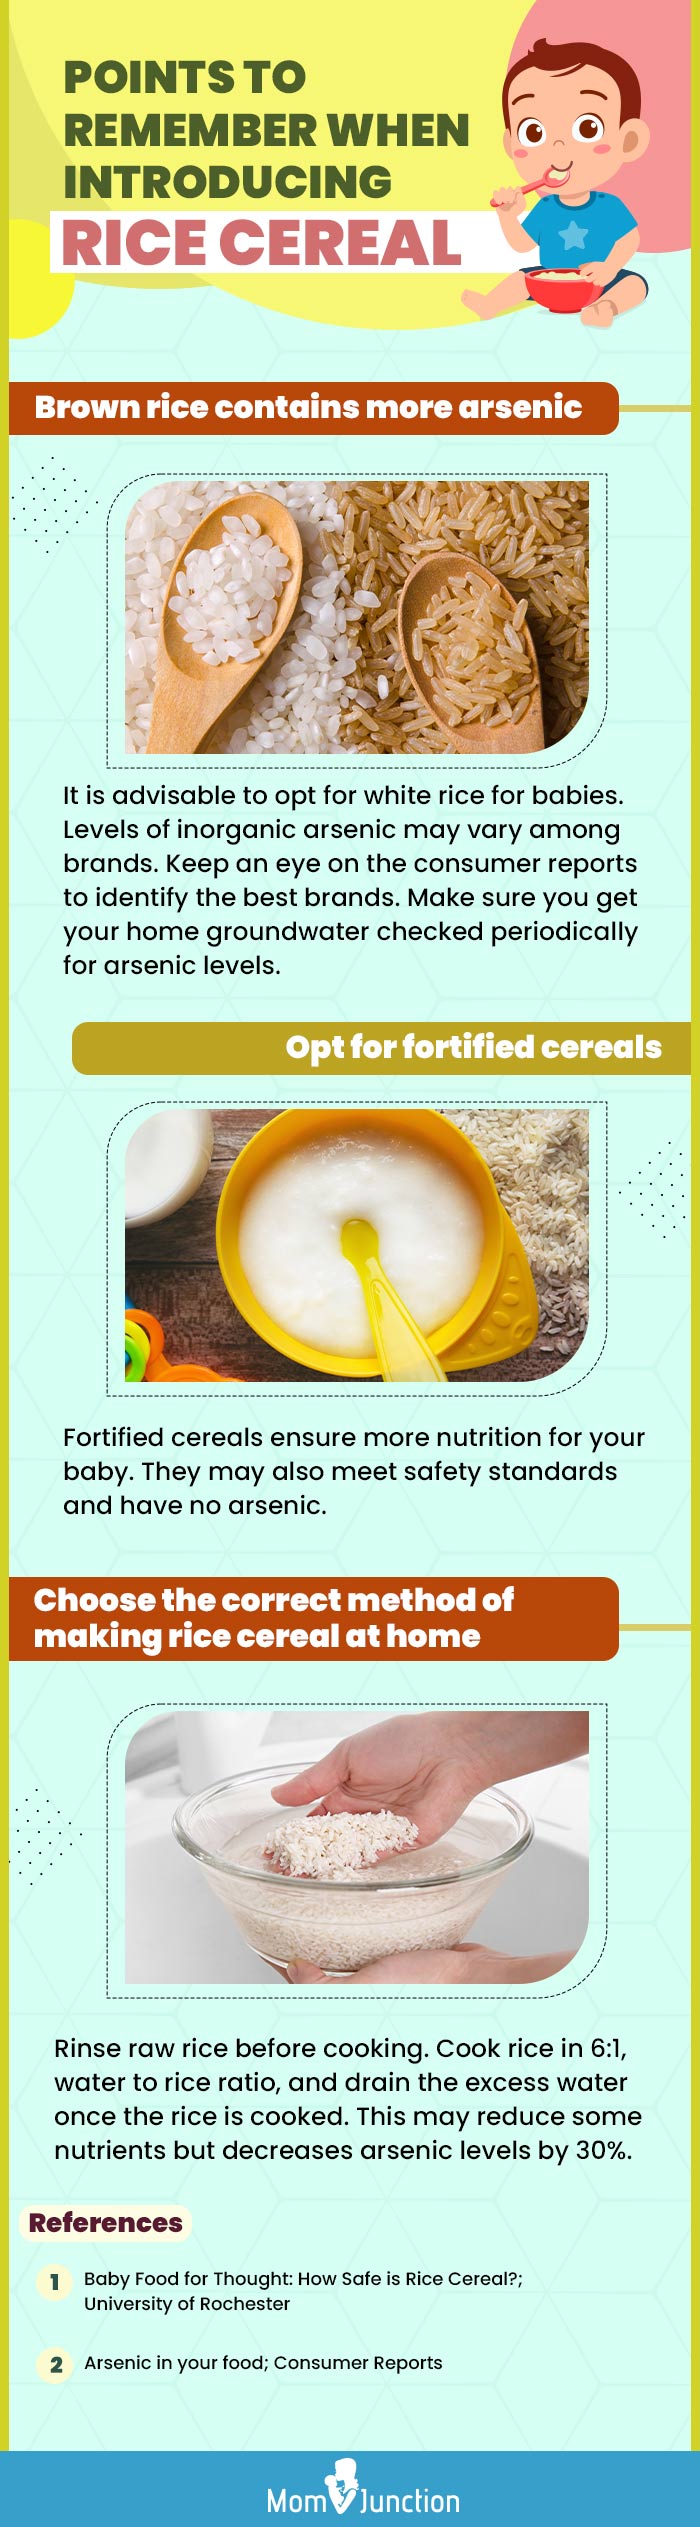 what else to know when introducing rice cereal to babies (infographic)